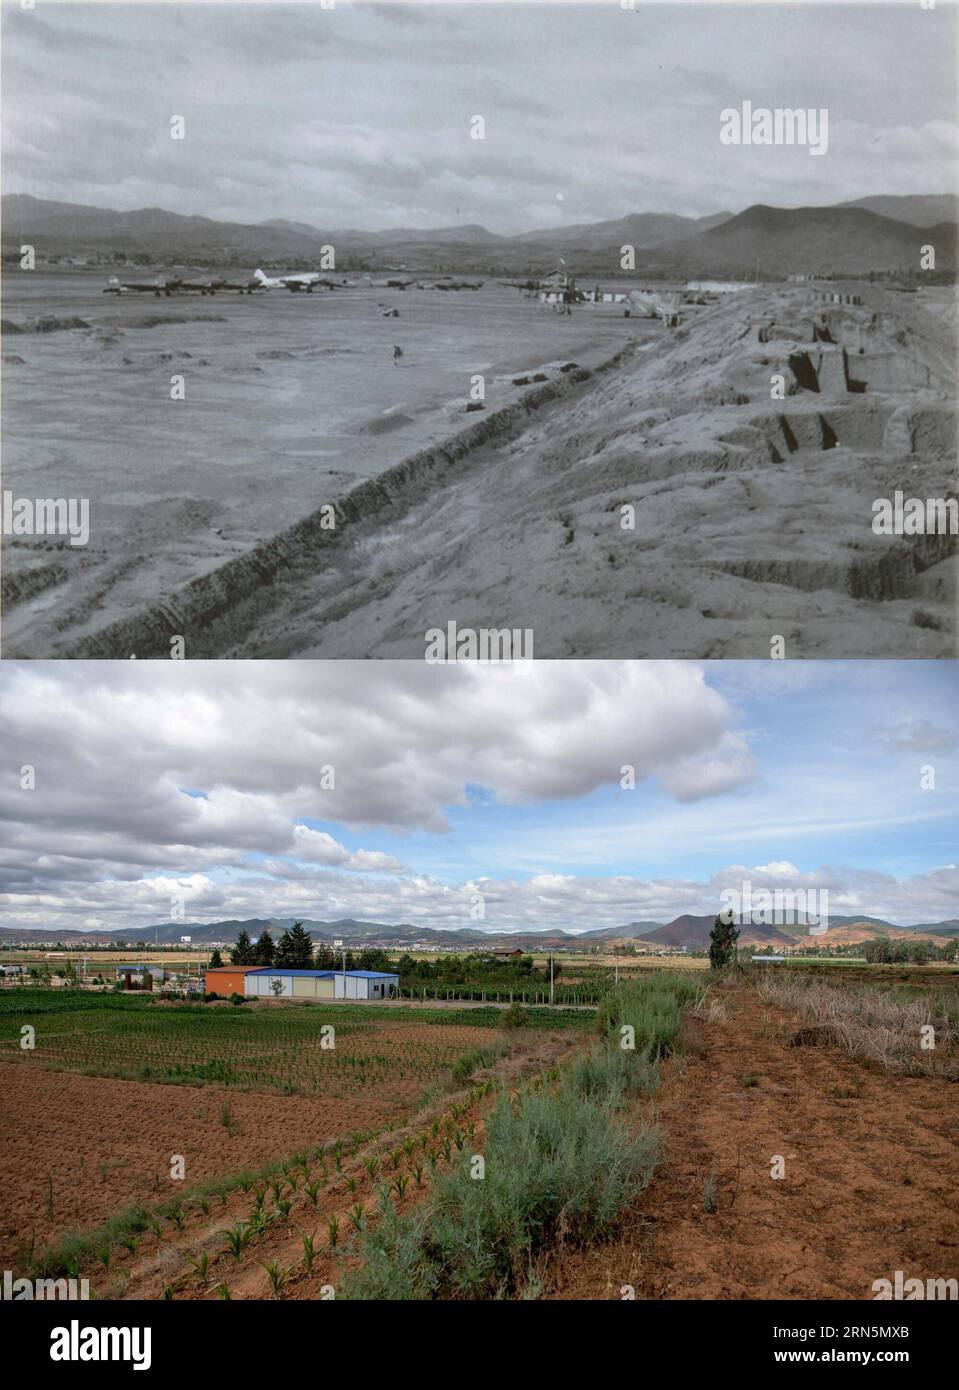 Combination photo taken during the anti-Japanese War (from 1937 to 1945) and June 29, 2015 (down) shows a contrast of view of Yunanyi Airport where the American Volunteer Group (AVG) stationed during the wartime in Xiangyun County, southwest China s Yunnan Province. The Yunnanyi Airport was used as an airbase by the AVG, which is popular known as the Flying Tigers , led by U.S. General Claire Lee Chennault to help the Chinese fight against Japanese air forces. ) (mt) CHINA-YUNAN-AVG-AIRPORT-ANTI-JAPANESE WAR (CN) LiuxChan PUBLICATIONxNOTxINxCHN   combination Photo Taken during The Anti Japanes Stock Photo